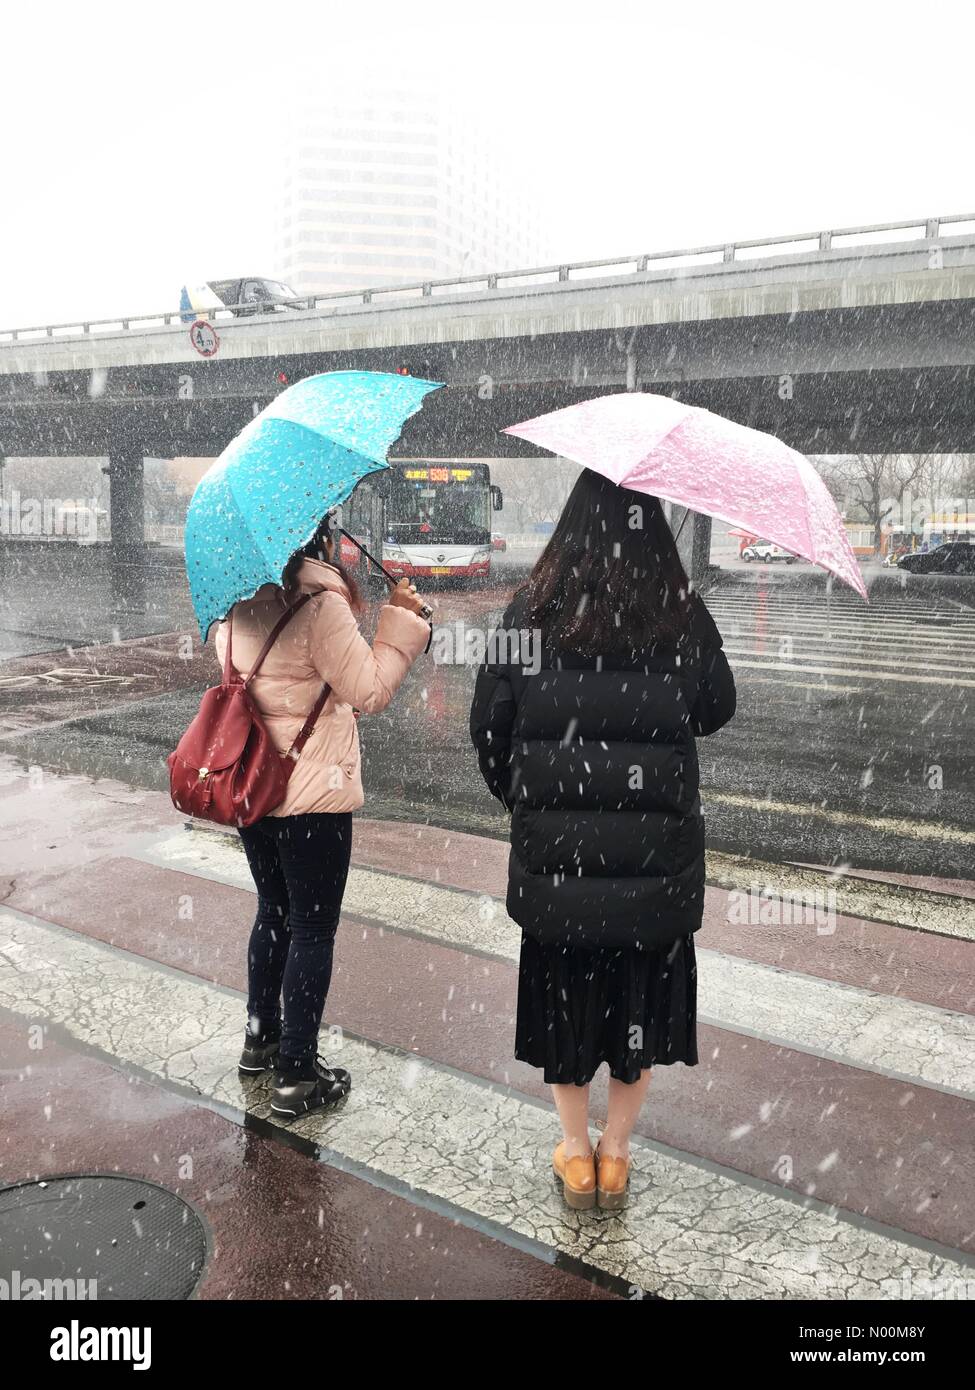 85 Chaoyang Qu, Beijing Shi, China. 17th Mar, 2018. Beijing, China- March 17, 2018: First snowy day in Beijing, China (Chaoyang district) sins winter 2016. Two girls with umbrellas at the intersection. Credit: Irkin09/StockimoNews/Alamy Live News Stock Photo